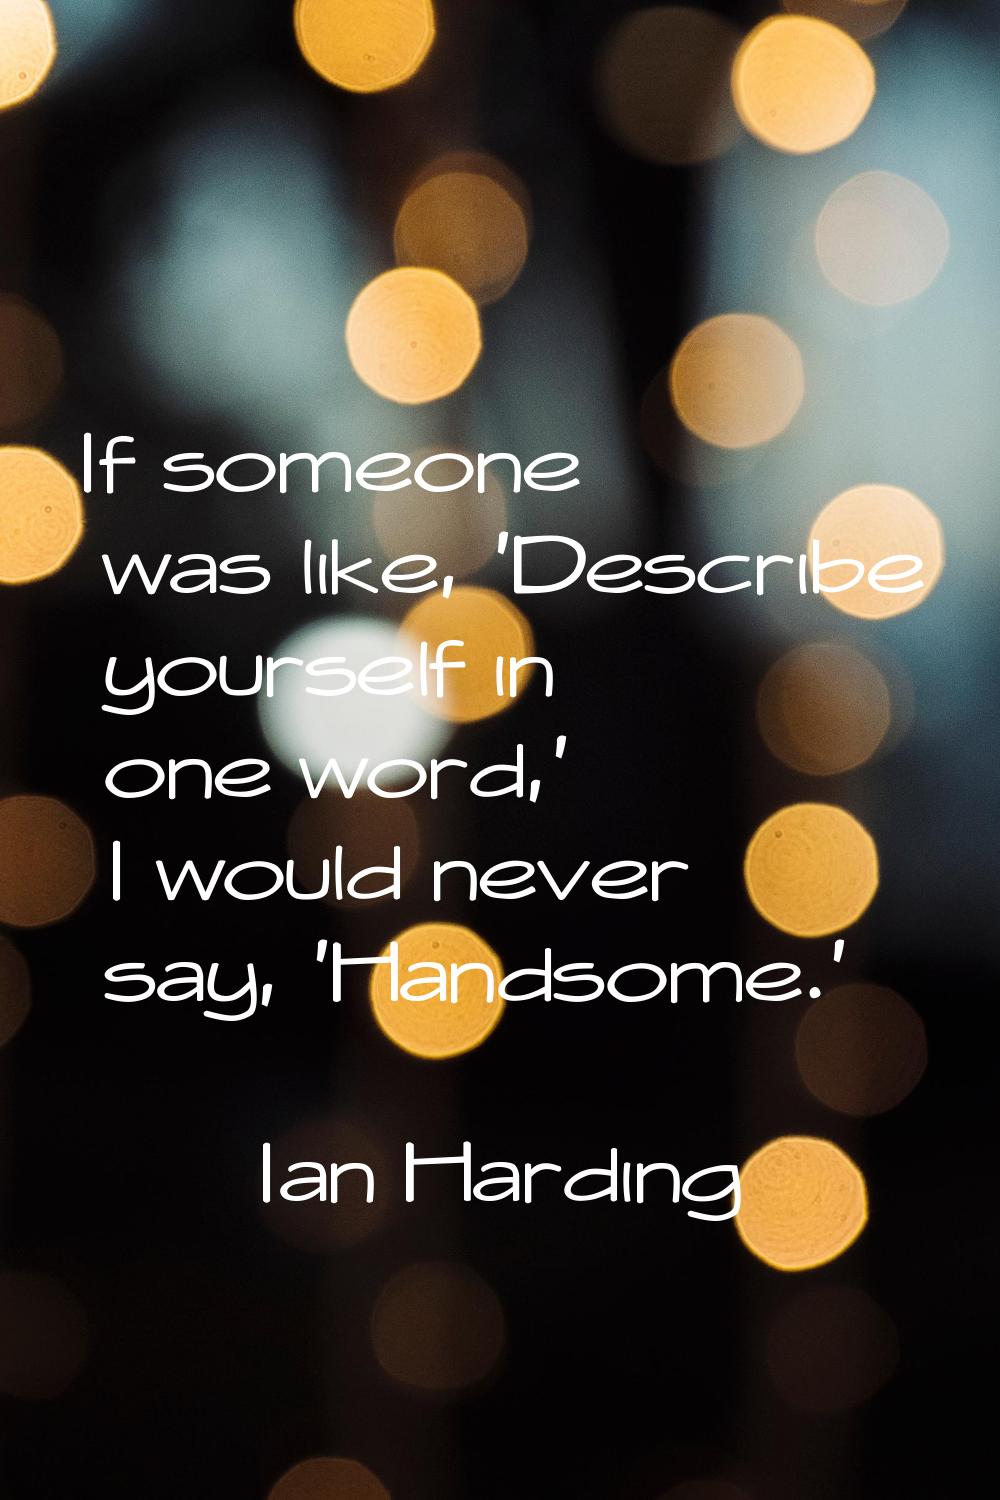 If someone was like, 'Describe yourself in one word,' I would never say, 'Handsome.'